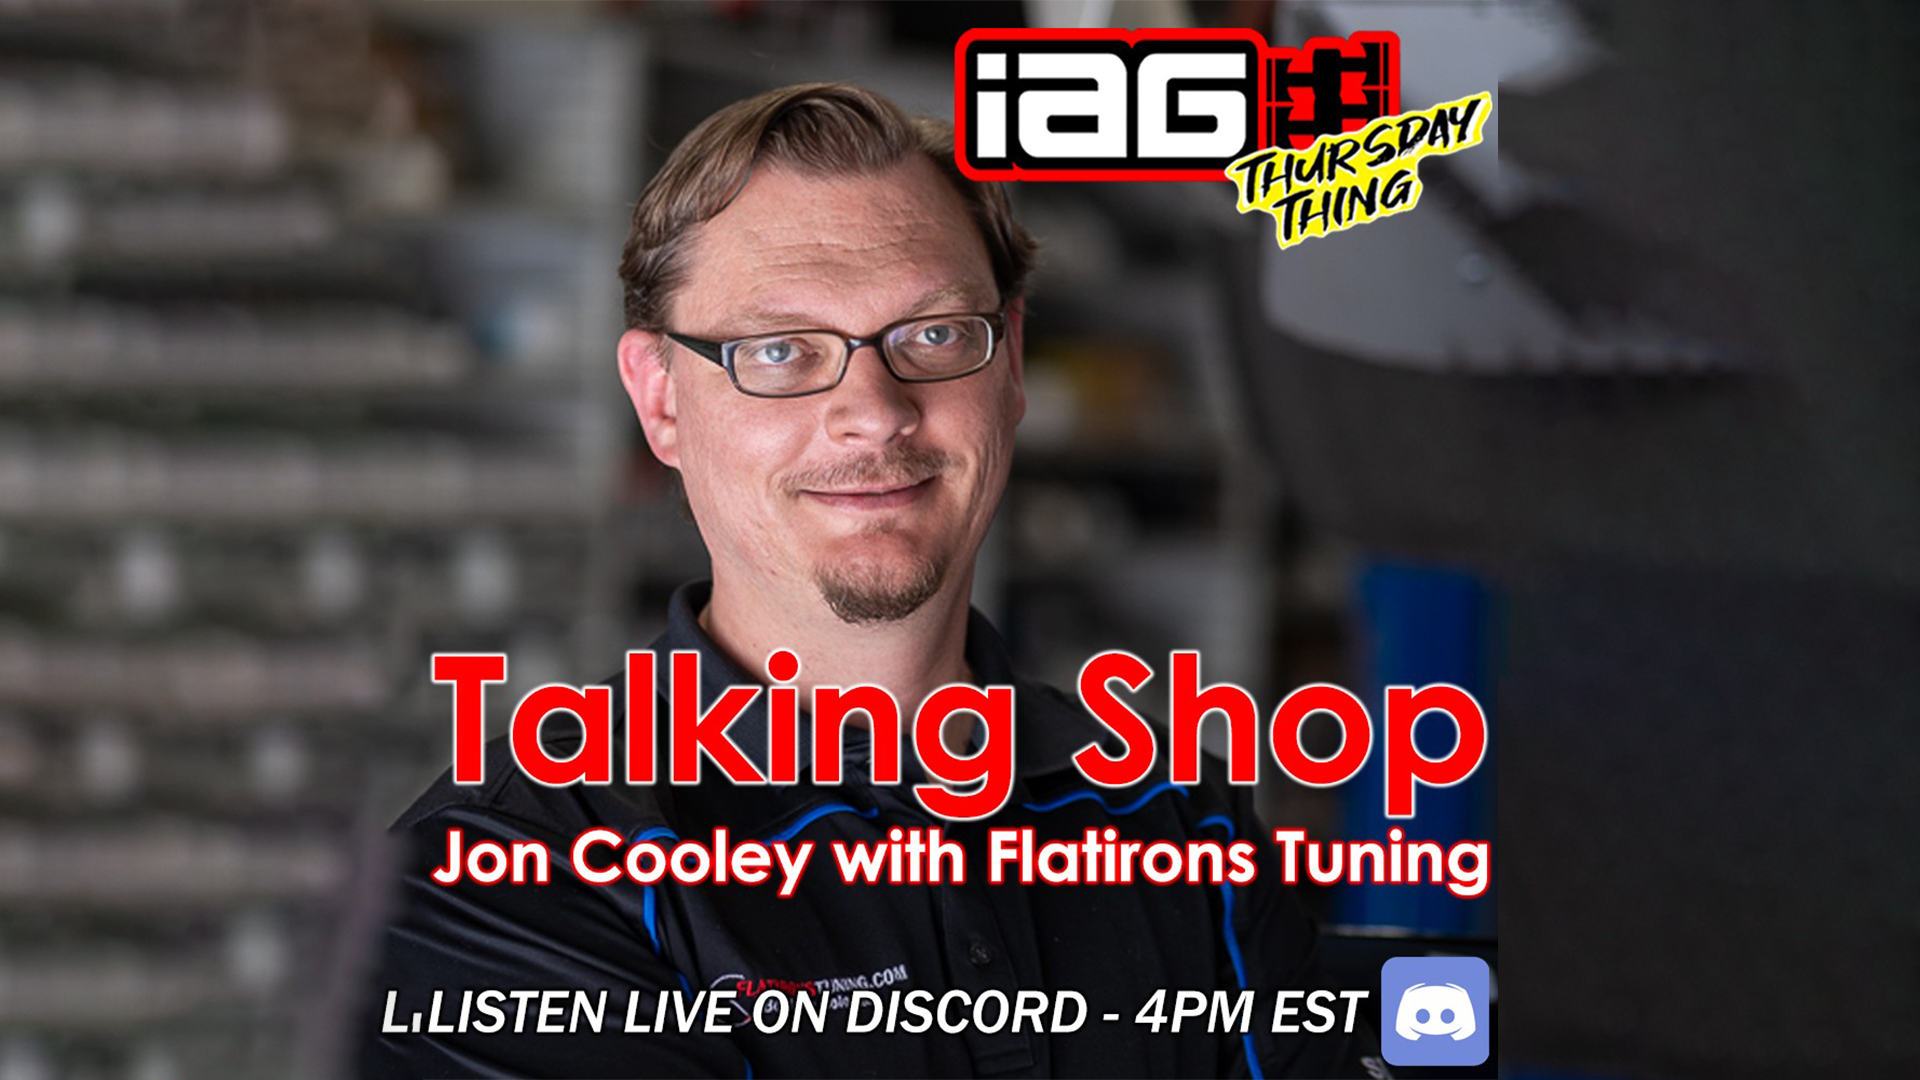 IAG Thursday Thing Ep. 28:  Talking Shop with Jon Cooley from Flatirons Tuning!